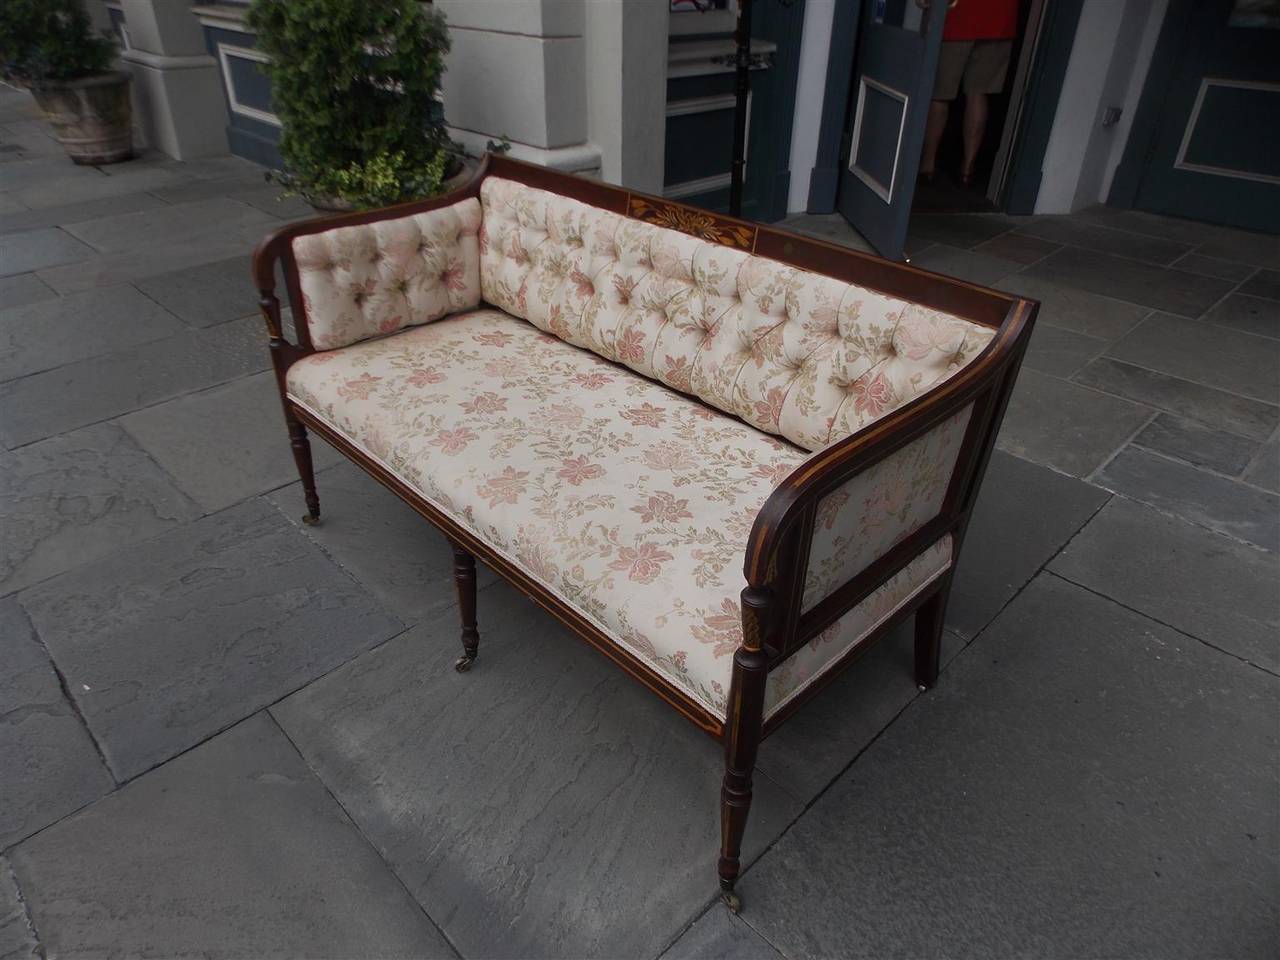 English Regency Stenciled and Gilt Tufted Upholstered Settee, Circa 1780 In Excellent Condition For Sale In Hollywood, SC